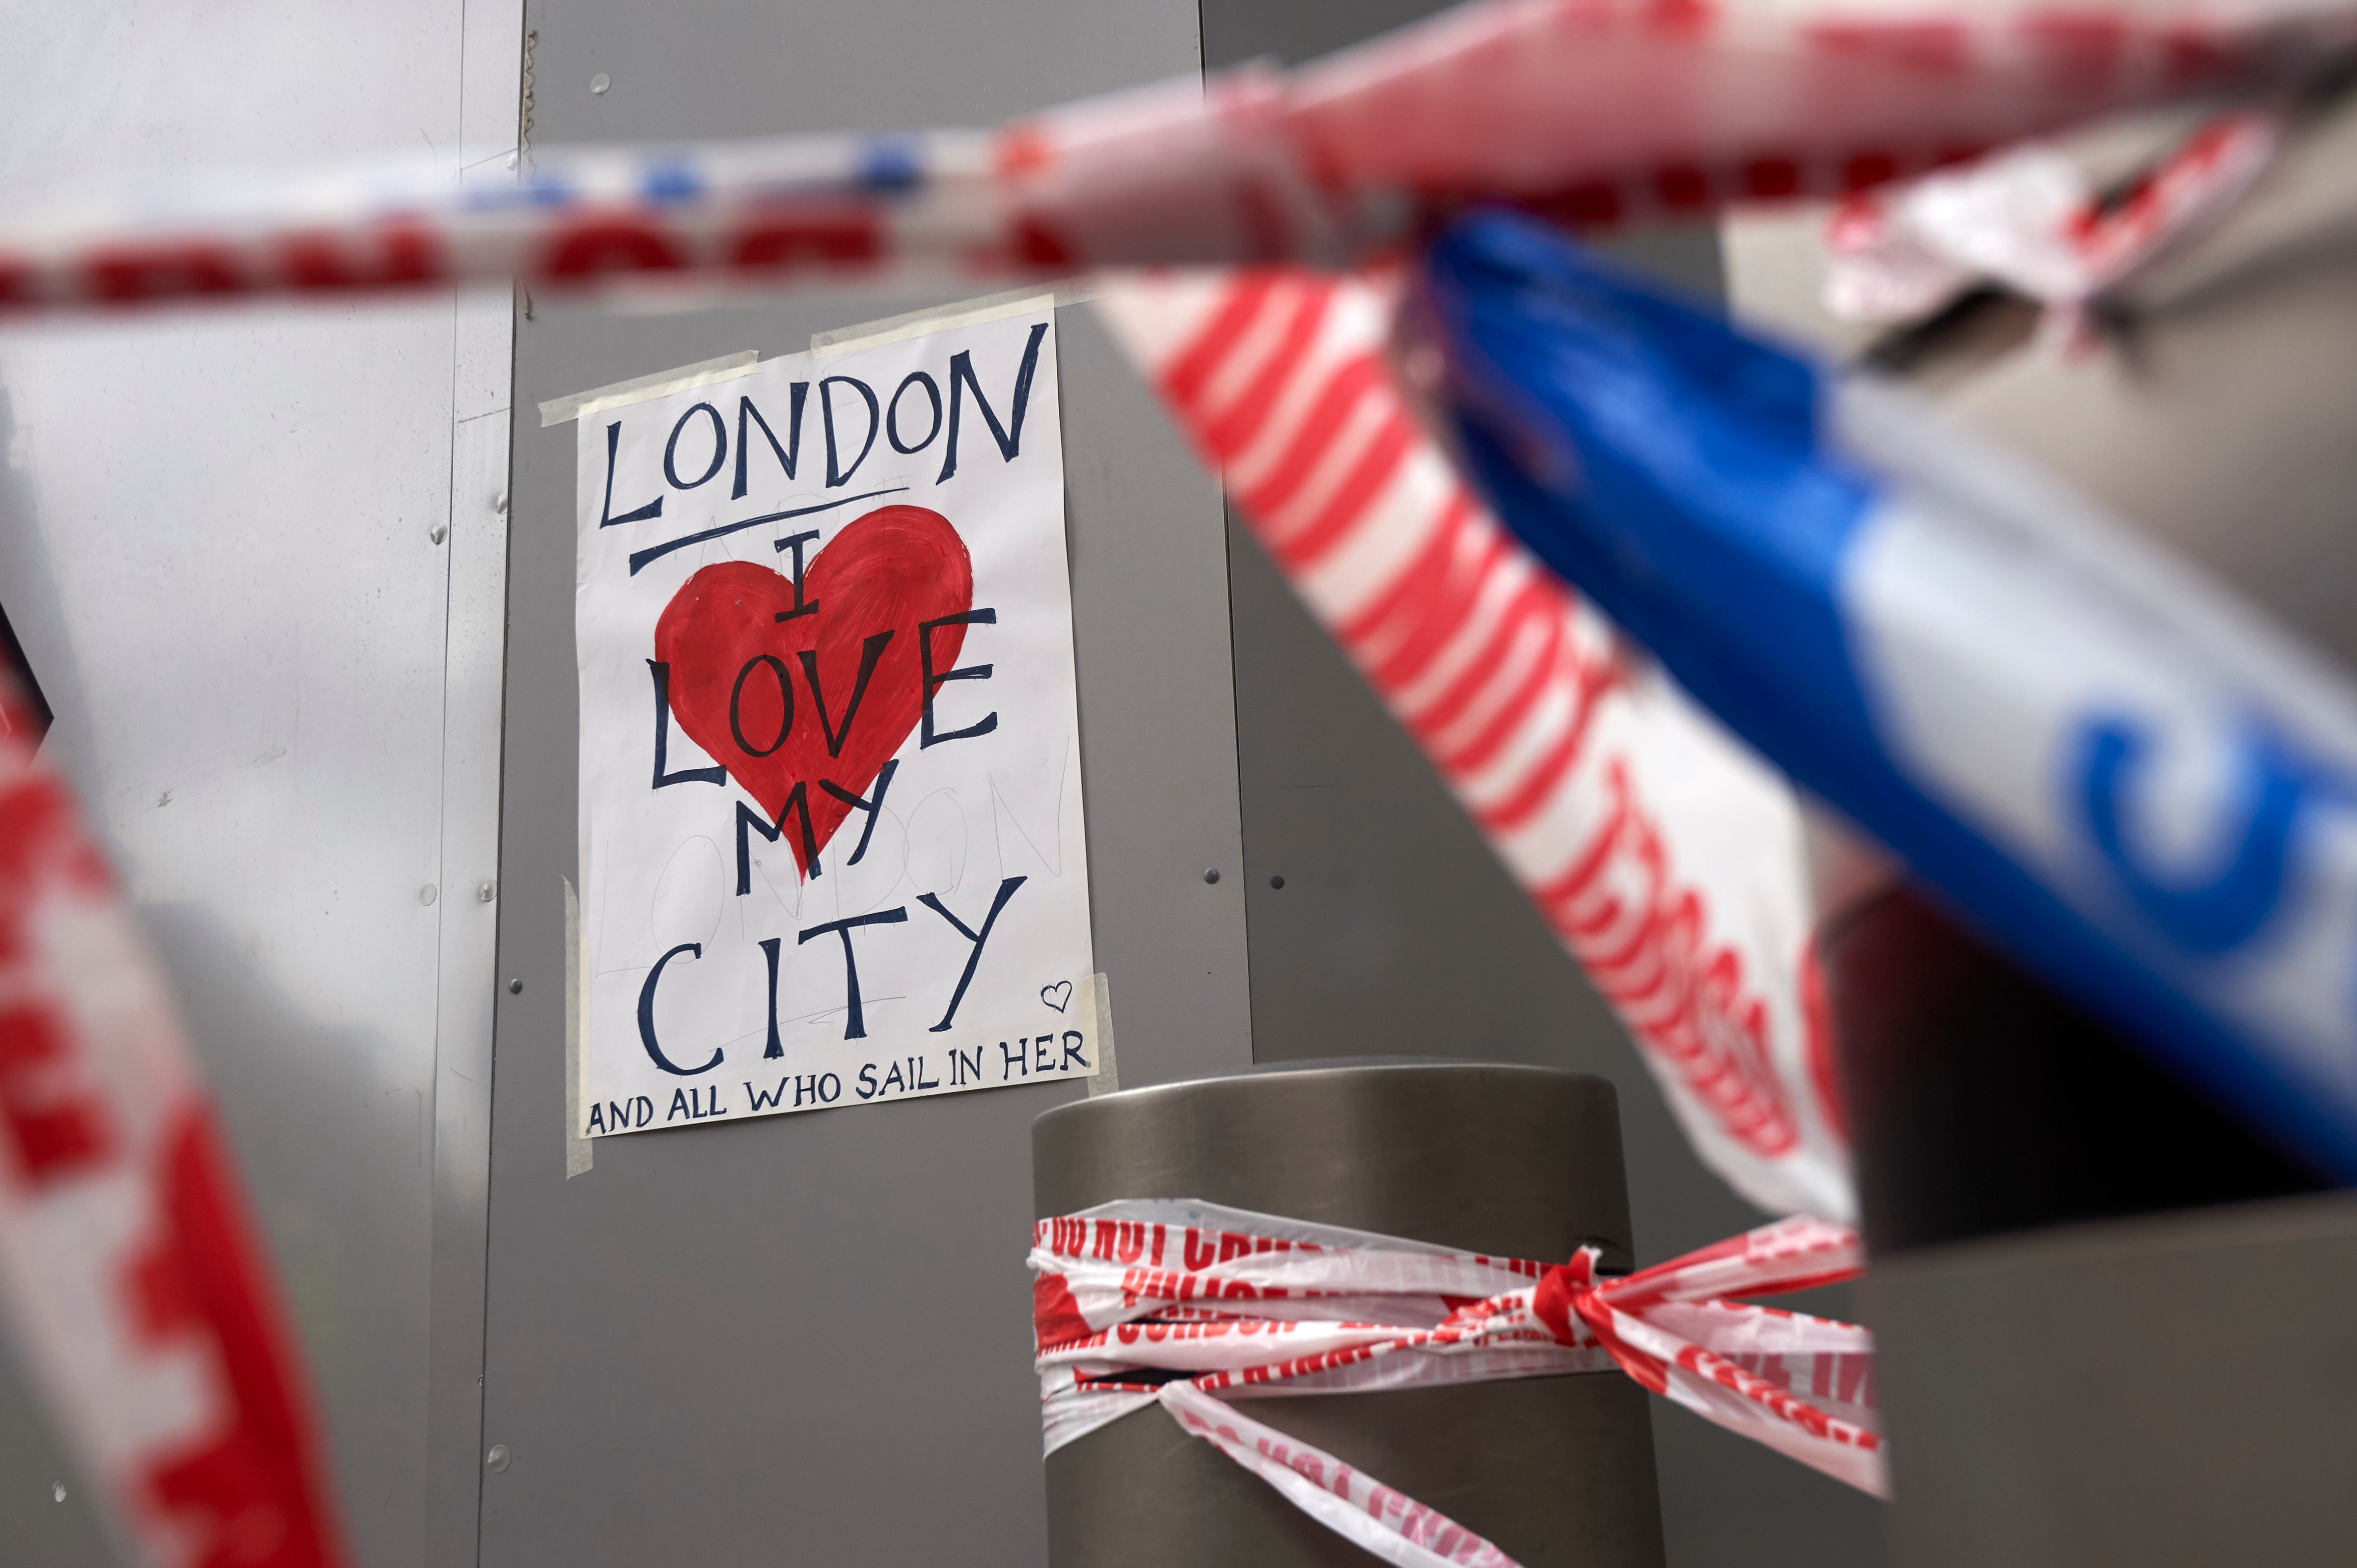 A poster in solidarity is seen on a hoarding outside London Bridge railway station in London on June 5, 2017 at the cordon near the police scene of the June 3 terror attack on London Bridge and the nearby Borough Market. (Niklas Halle'n—AFP/Getty Images)